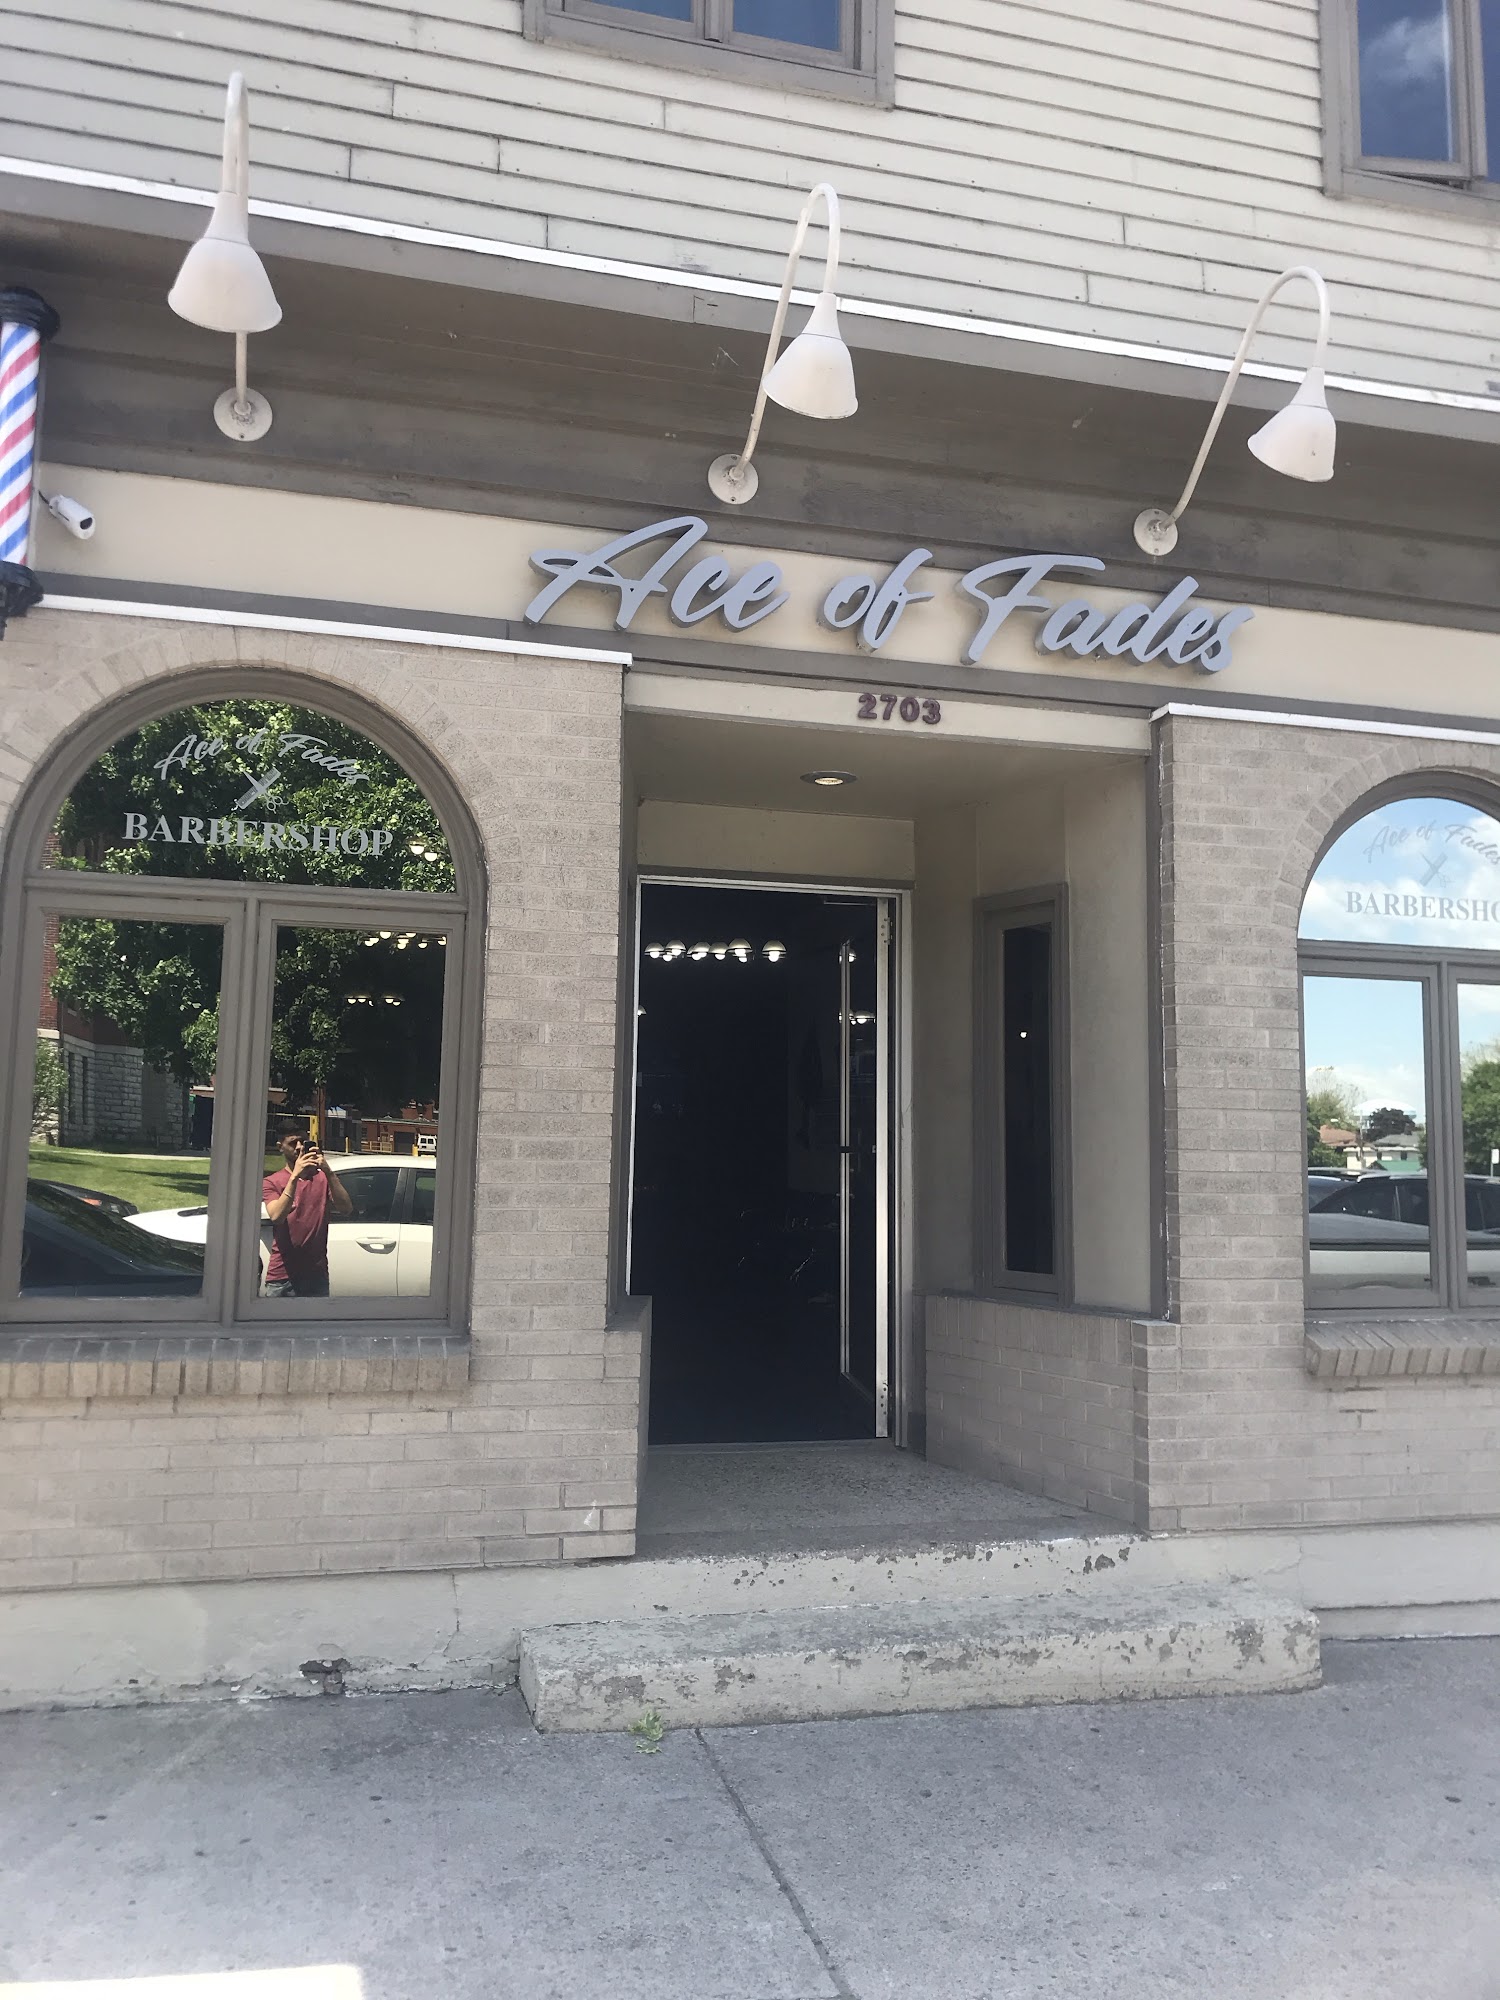 Ace Of Fades barbershop 2703 South Park Ave, Lackawanna New York 14218